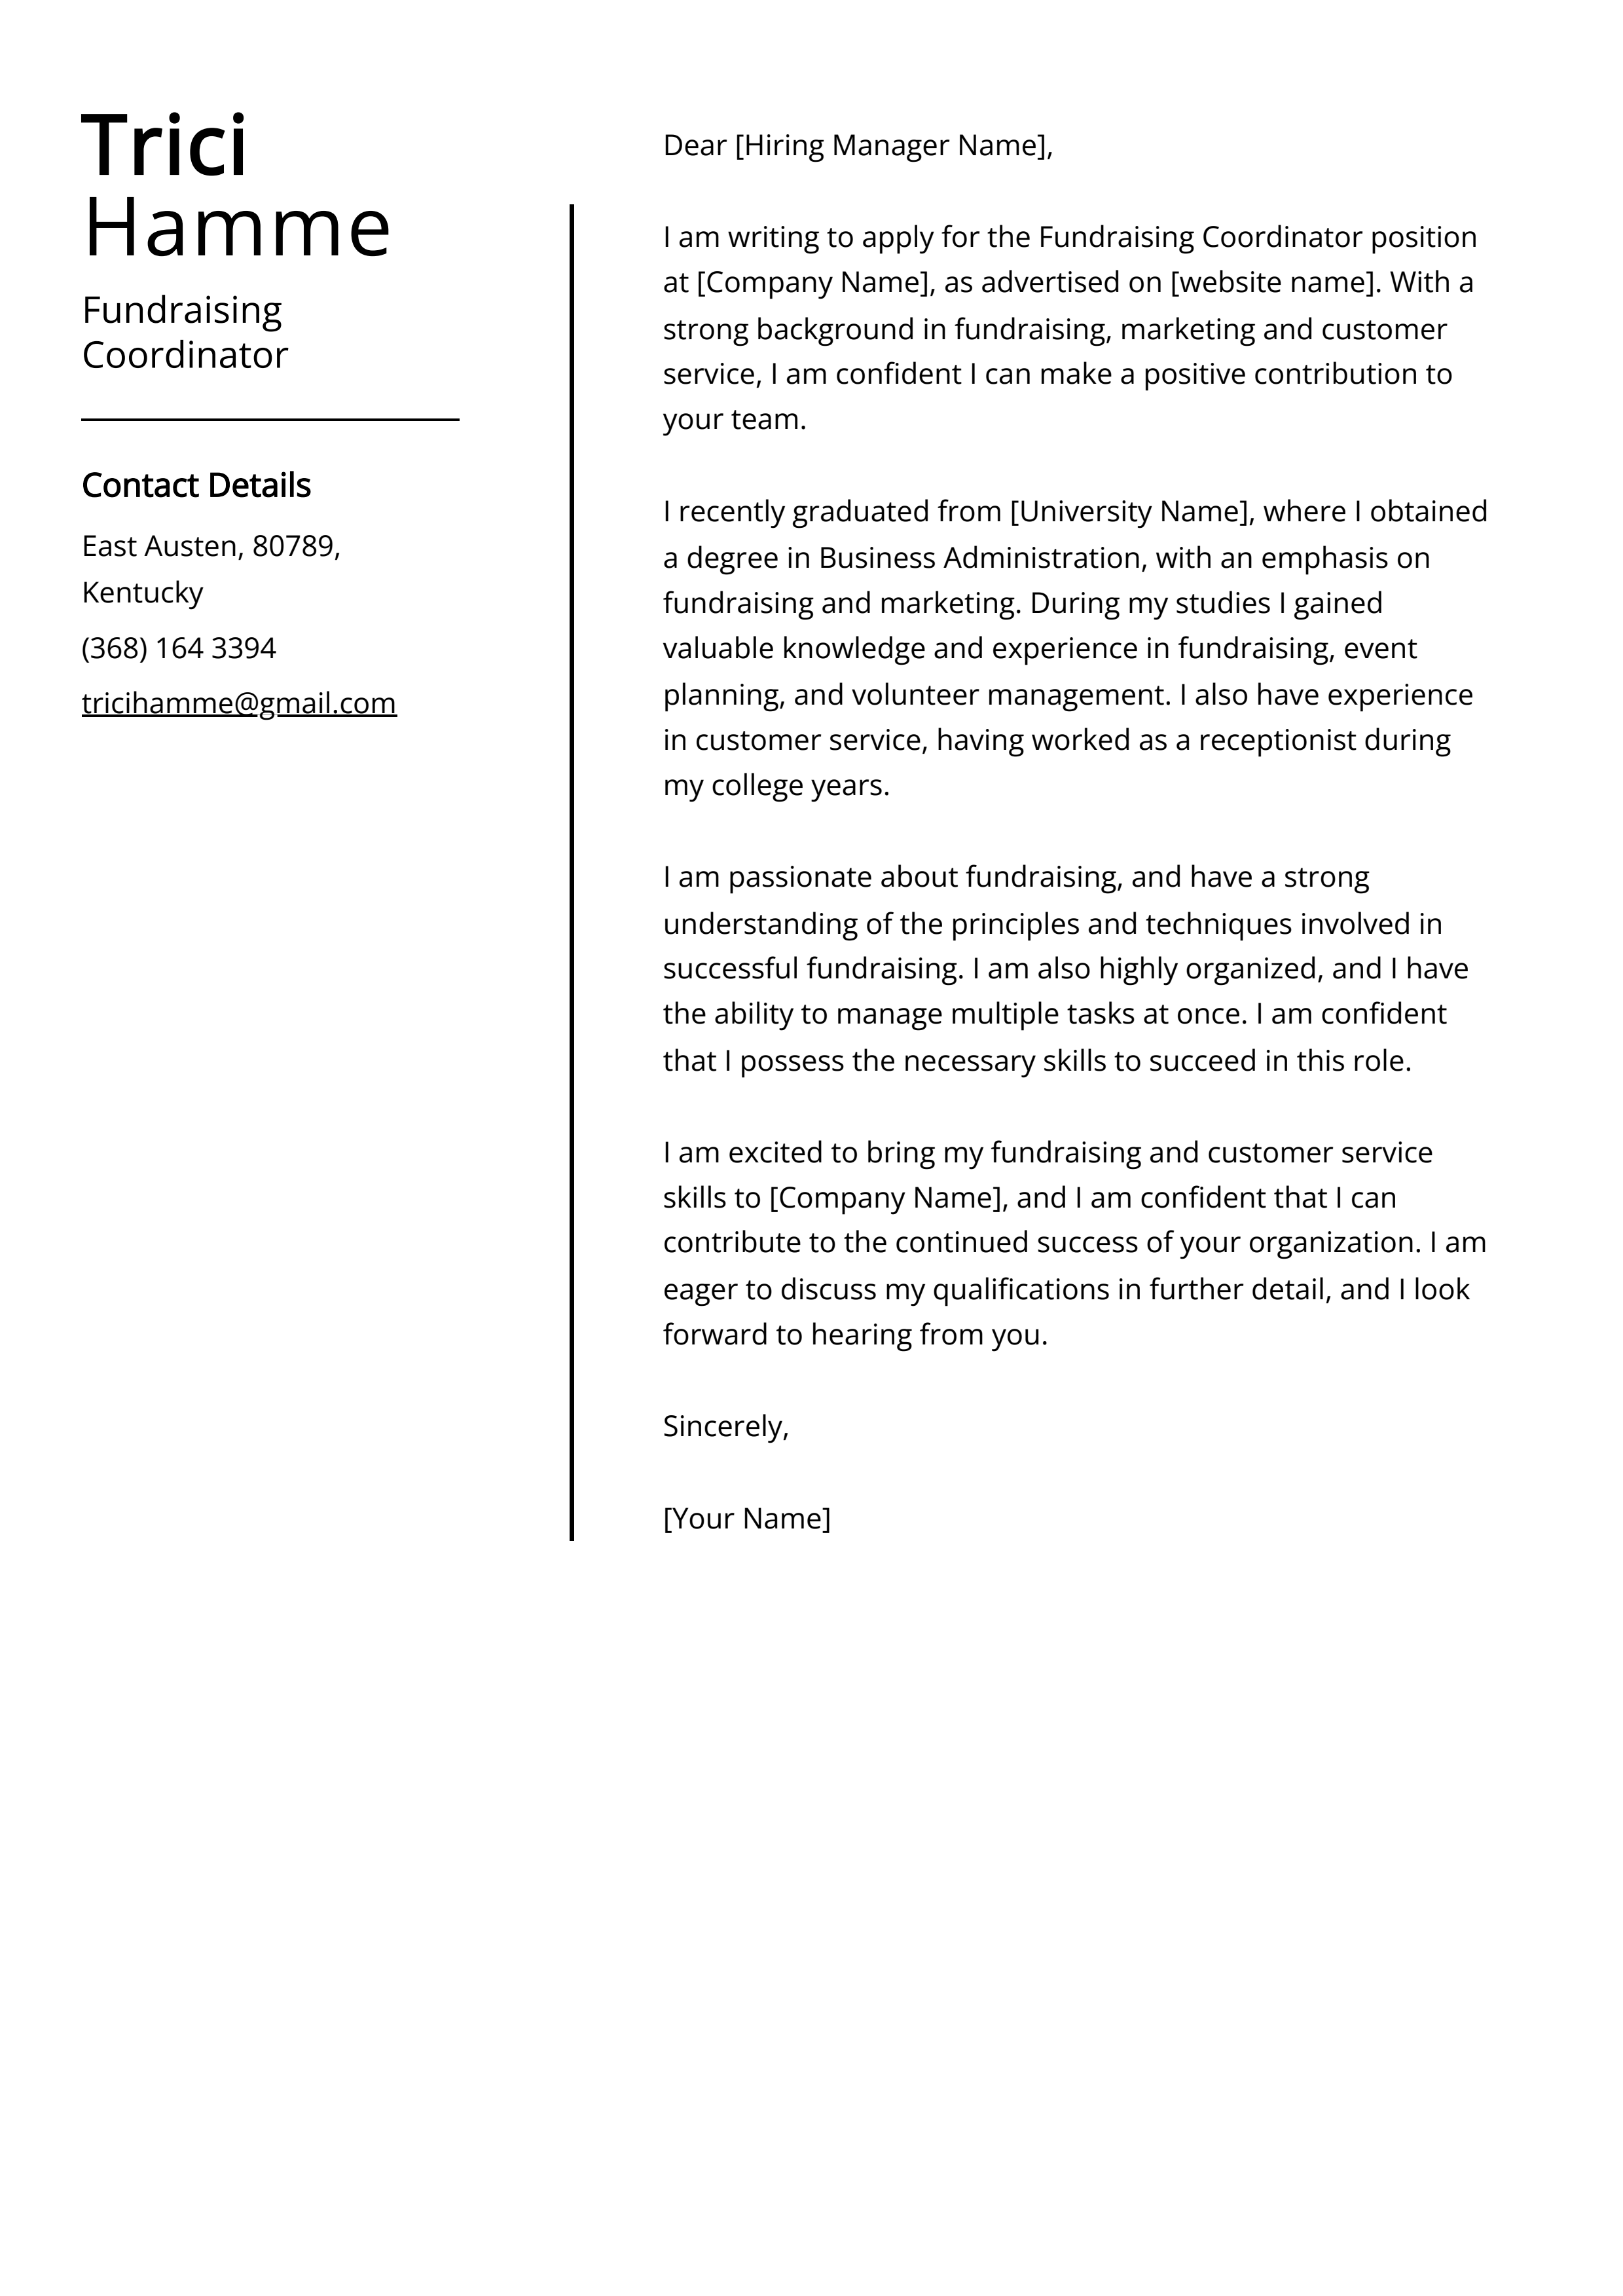 Fundraising Coordinator Cover Letter Example